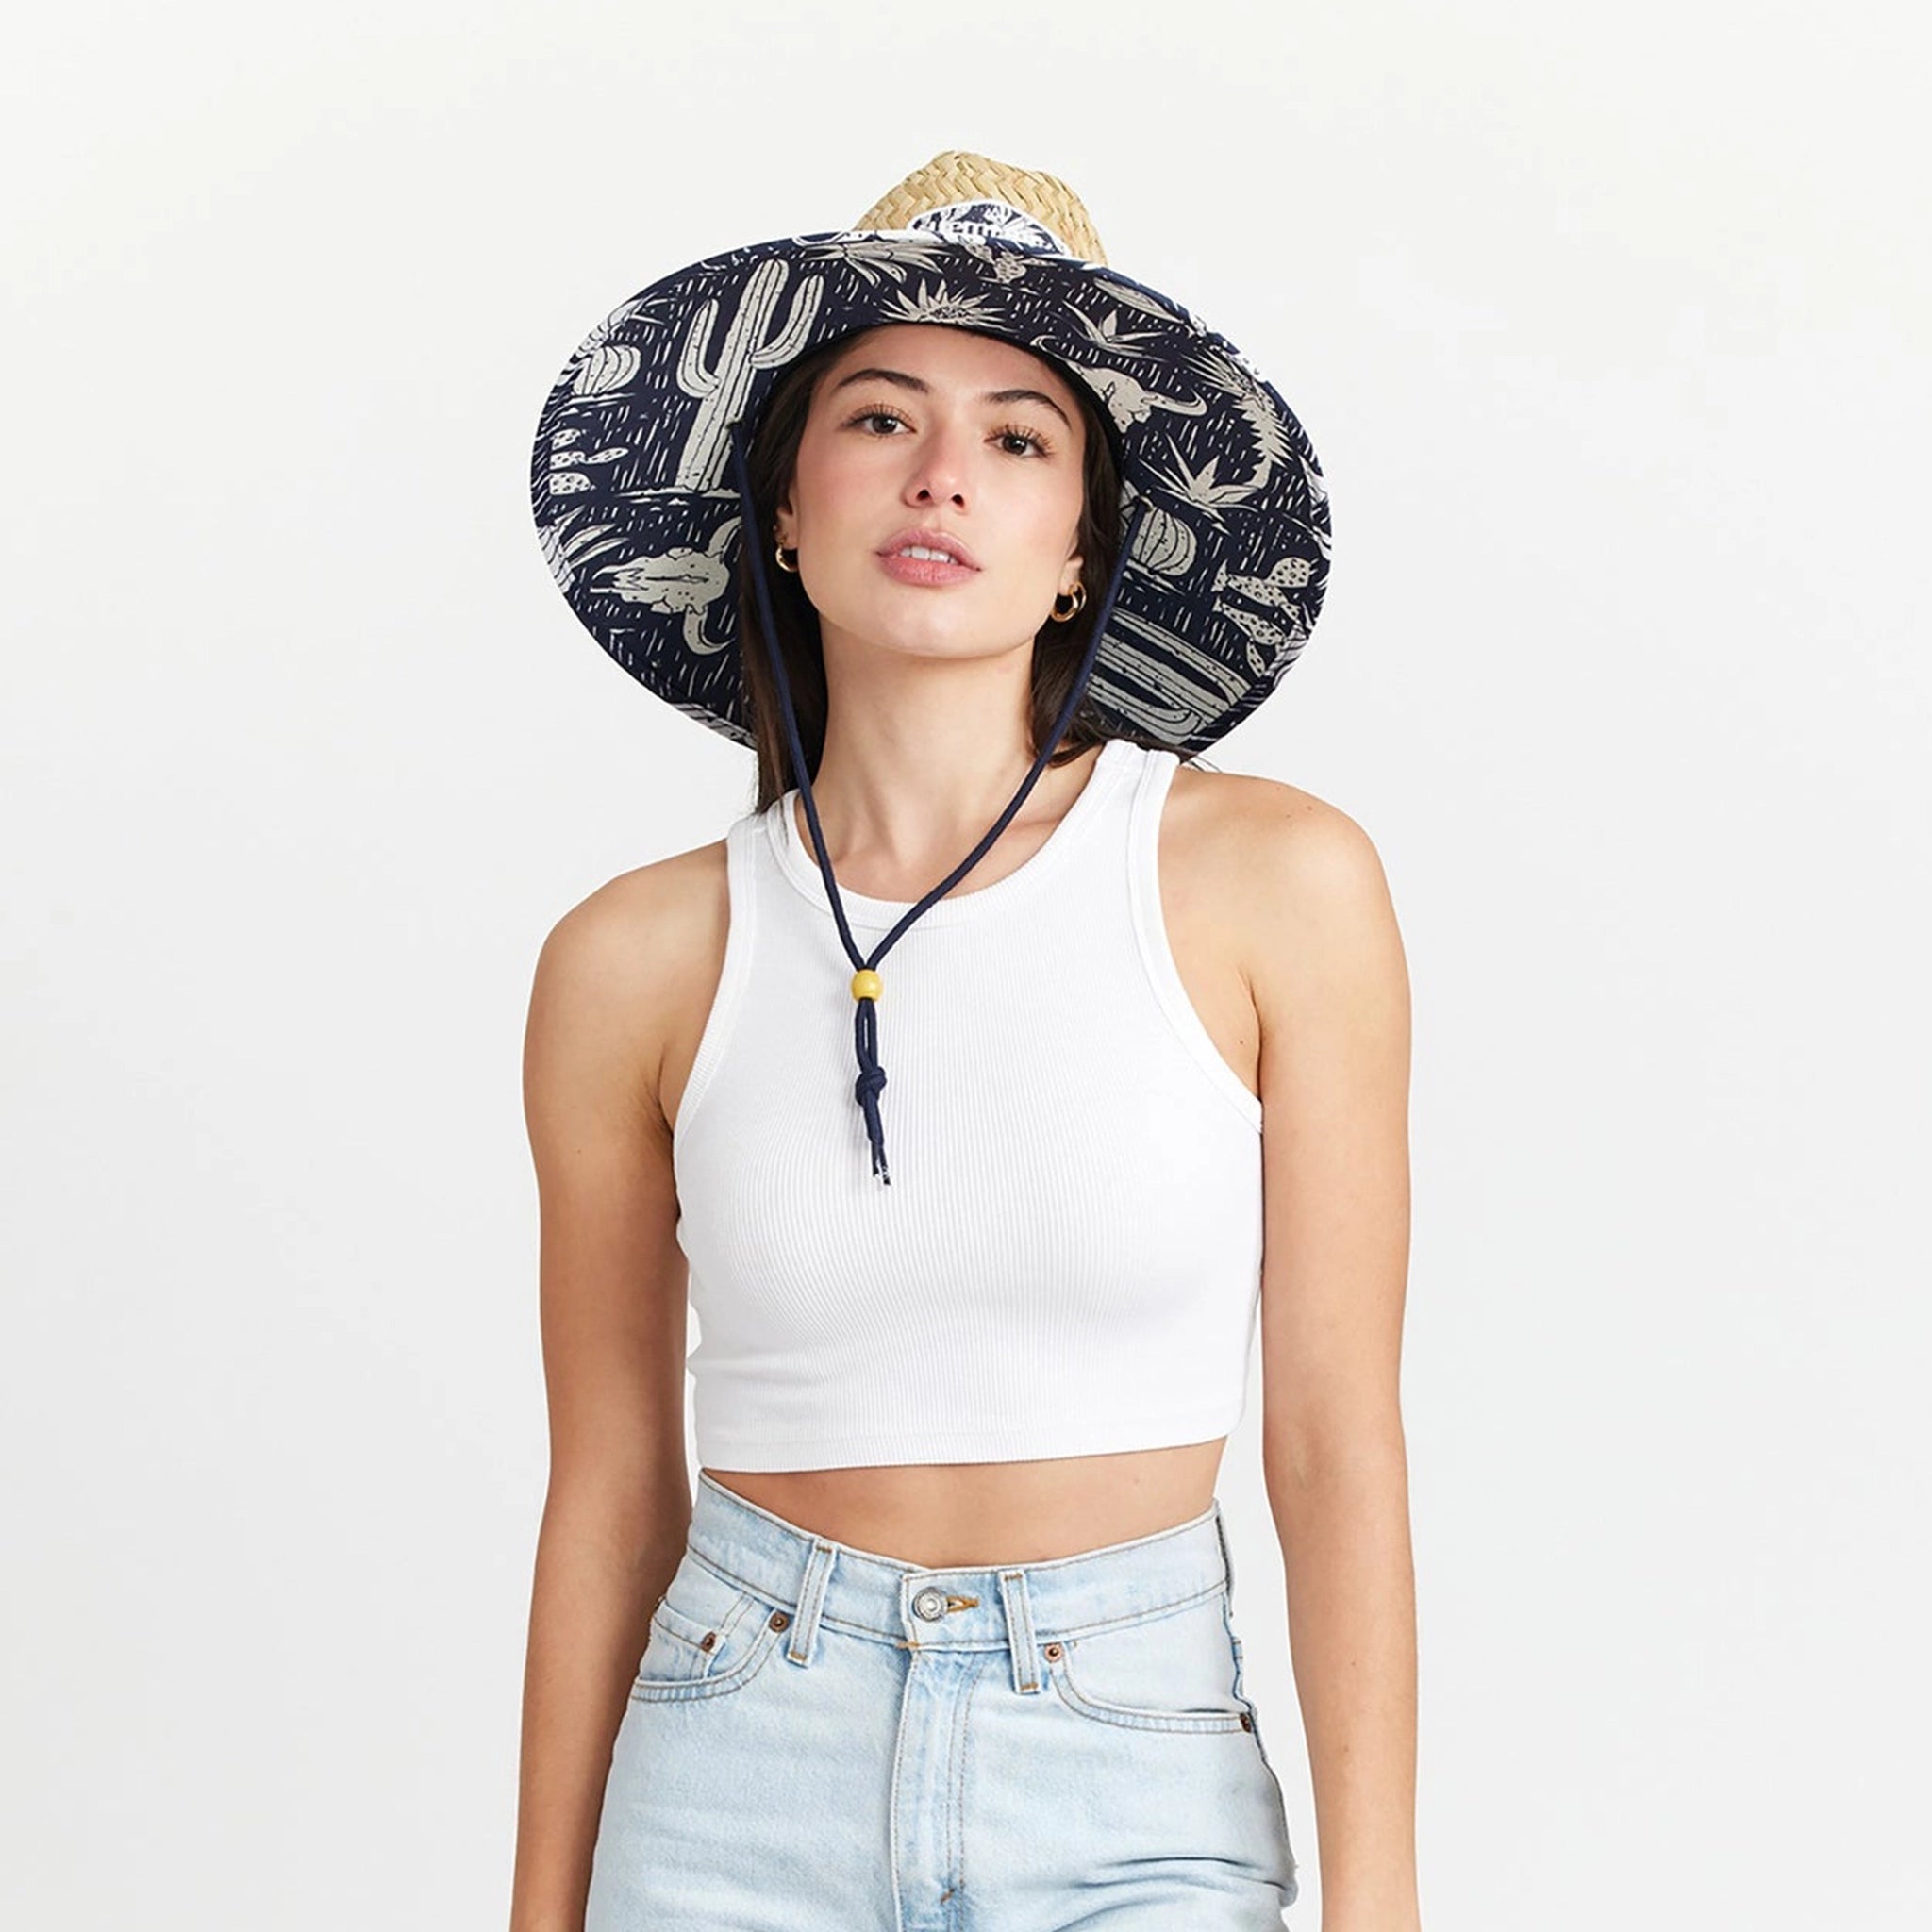 A straw sun hat with a dark blue and white desert design under the brim and a coordinating neck strap.